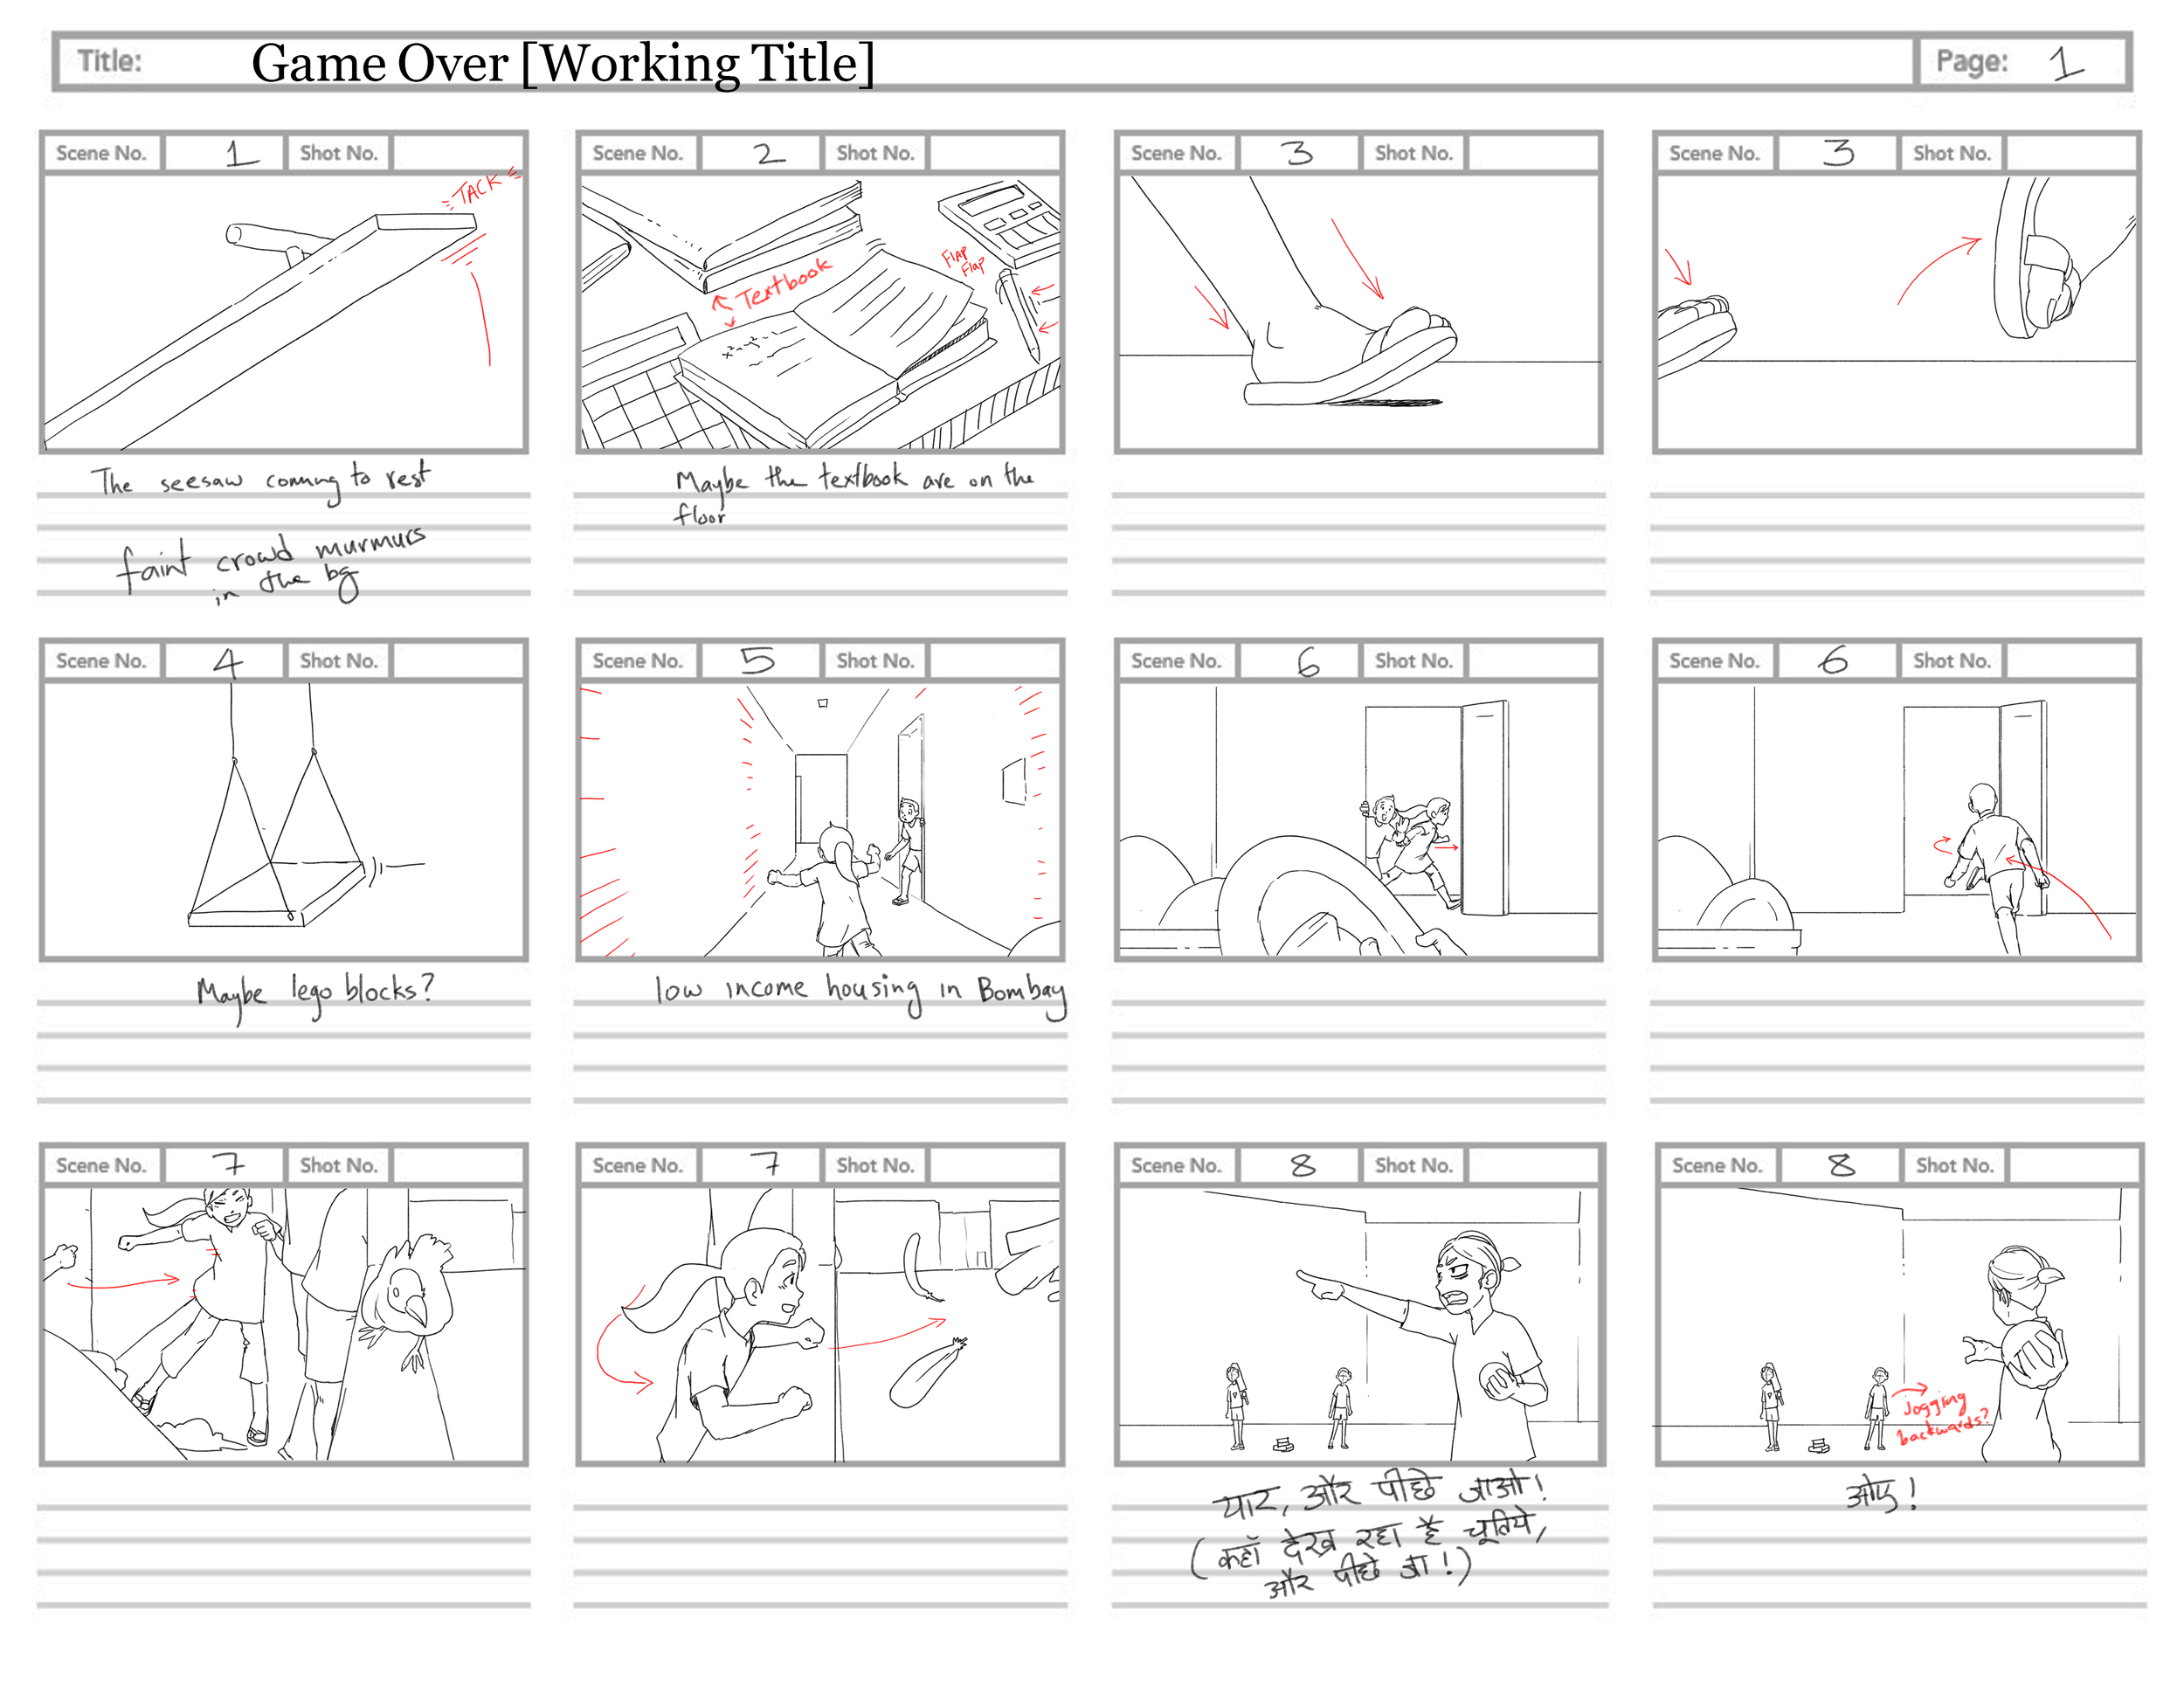 Storyboard_page 1.png